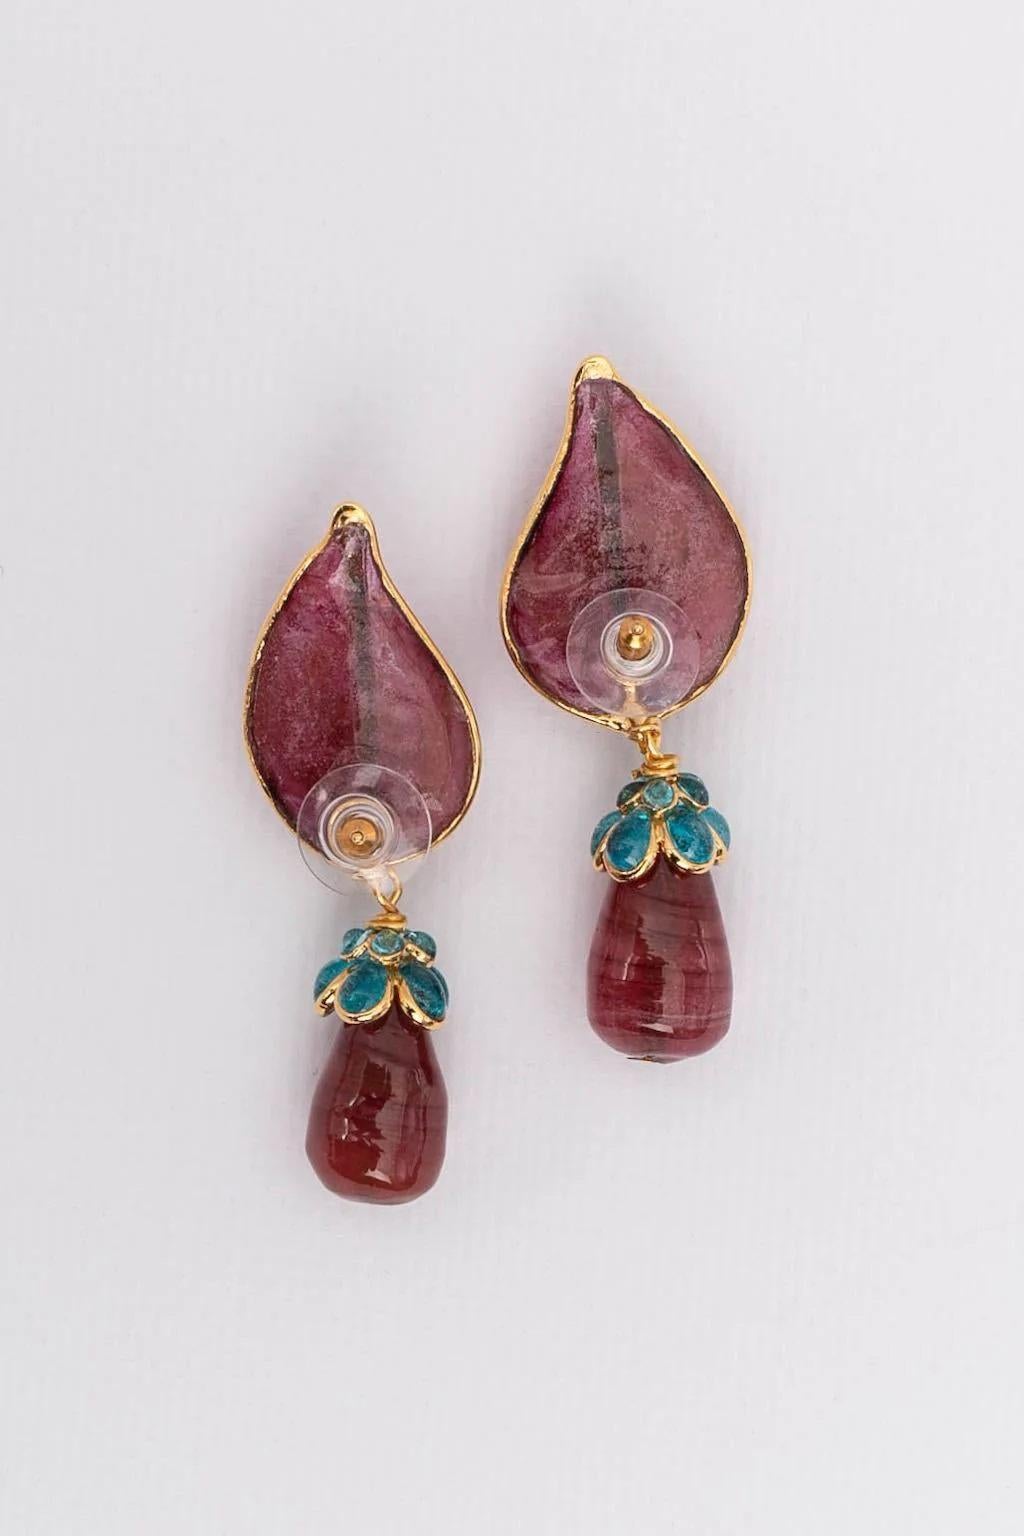 Artist Augustine Gilted Metal Earrings with Pink Glass Paste For Sale